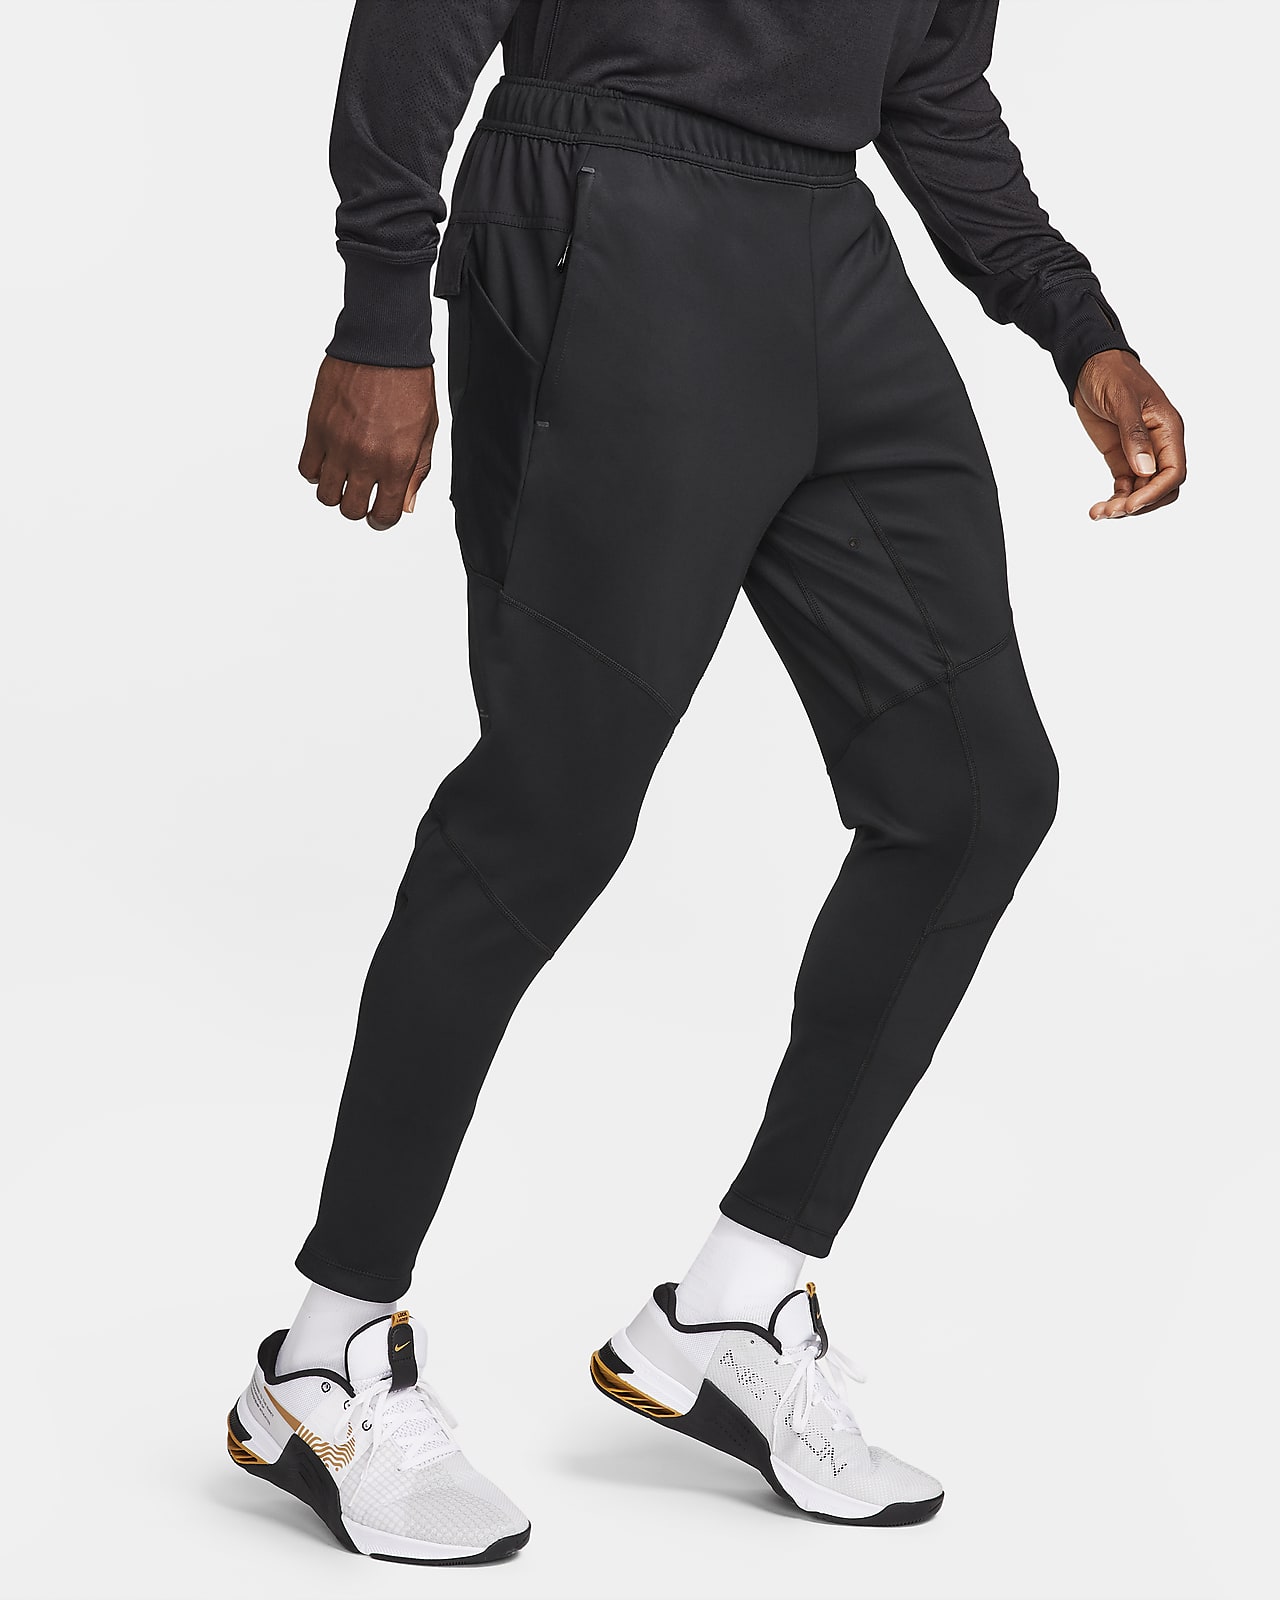 https://static.nike.com/a/images/t_PDP_1280_v1/f_auto,q_auto:eco/2969de8e-c62e-45ef-bba3-d422f302c0f2/dri-fit-adv-axis-utility-fitness-trousers-71C0vh.png